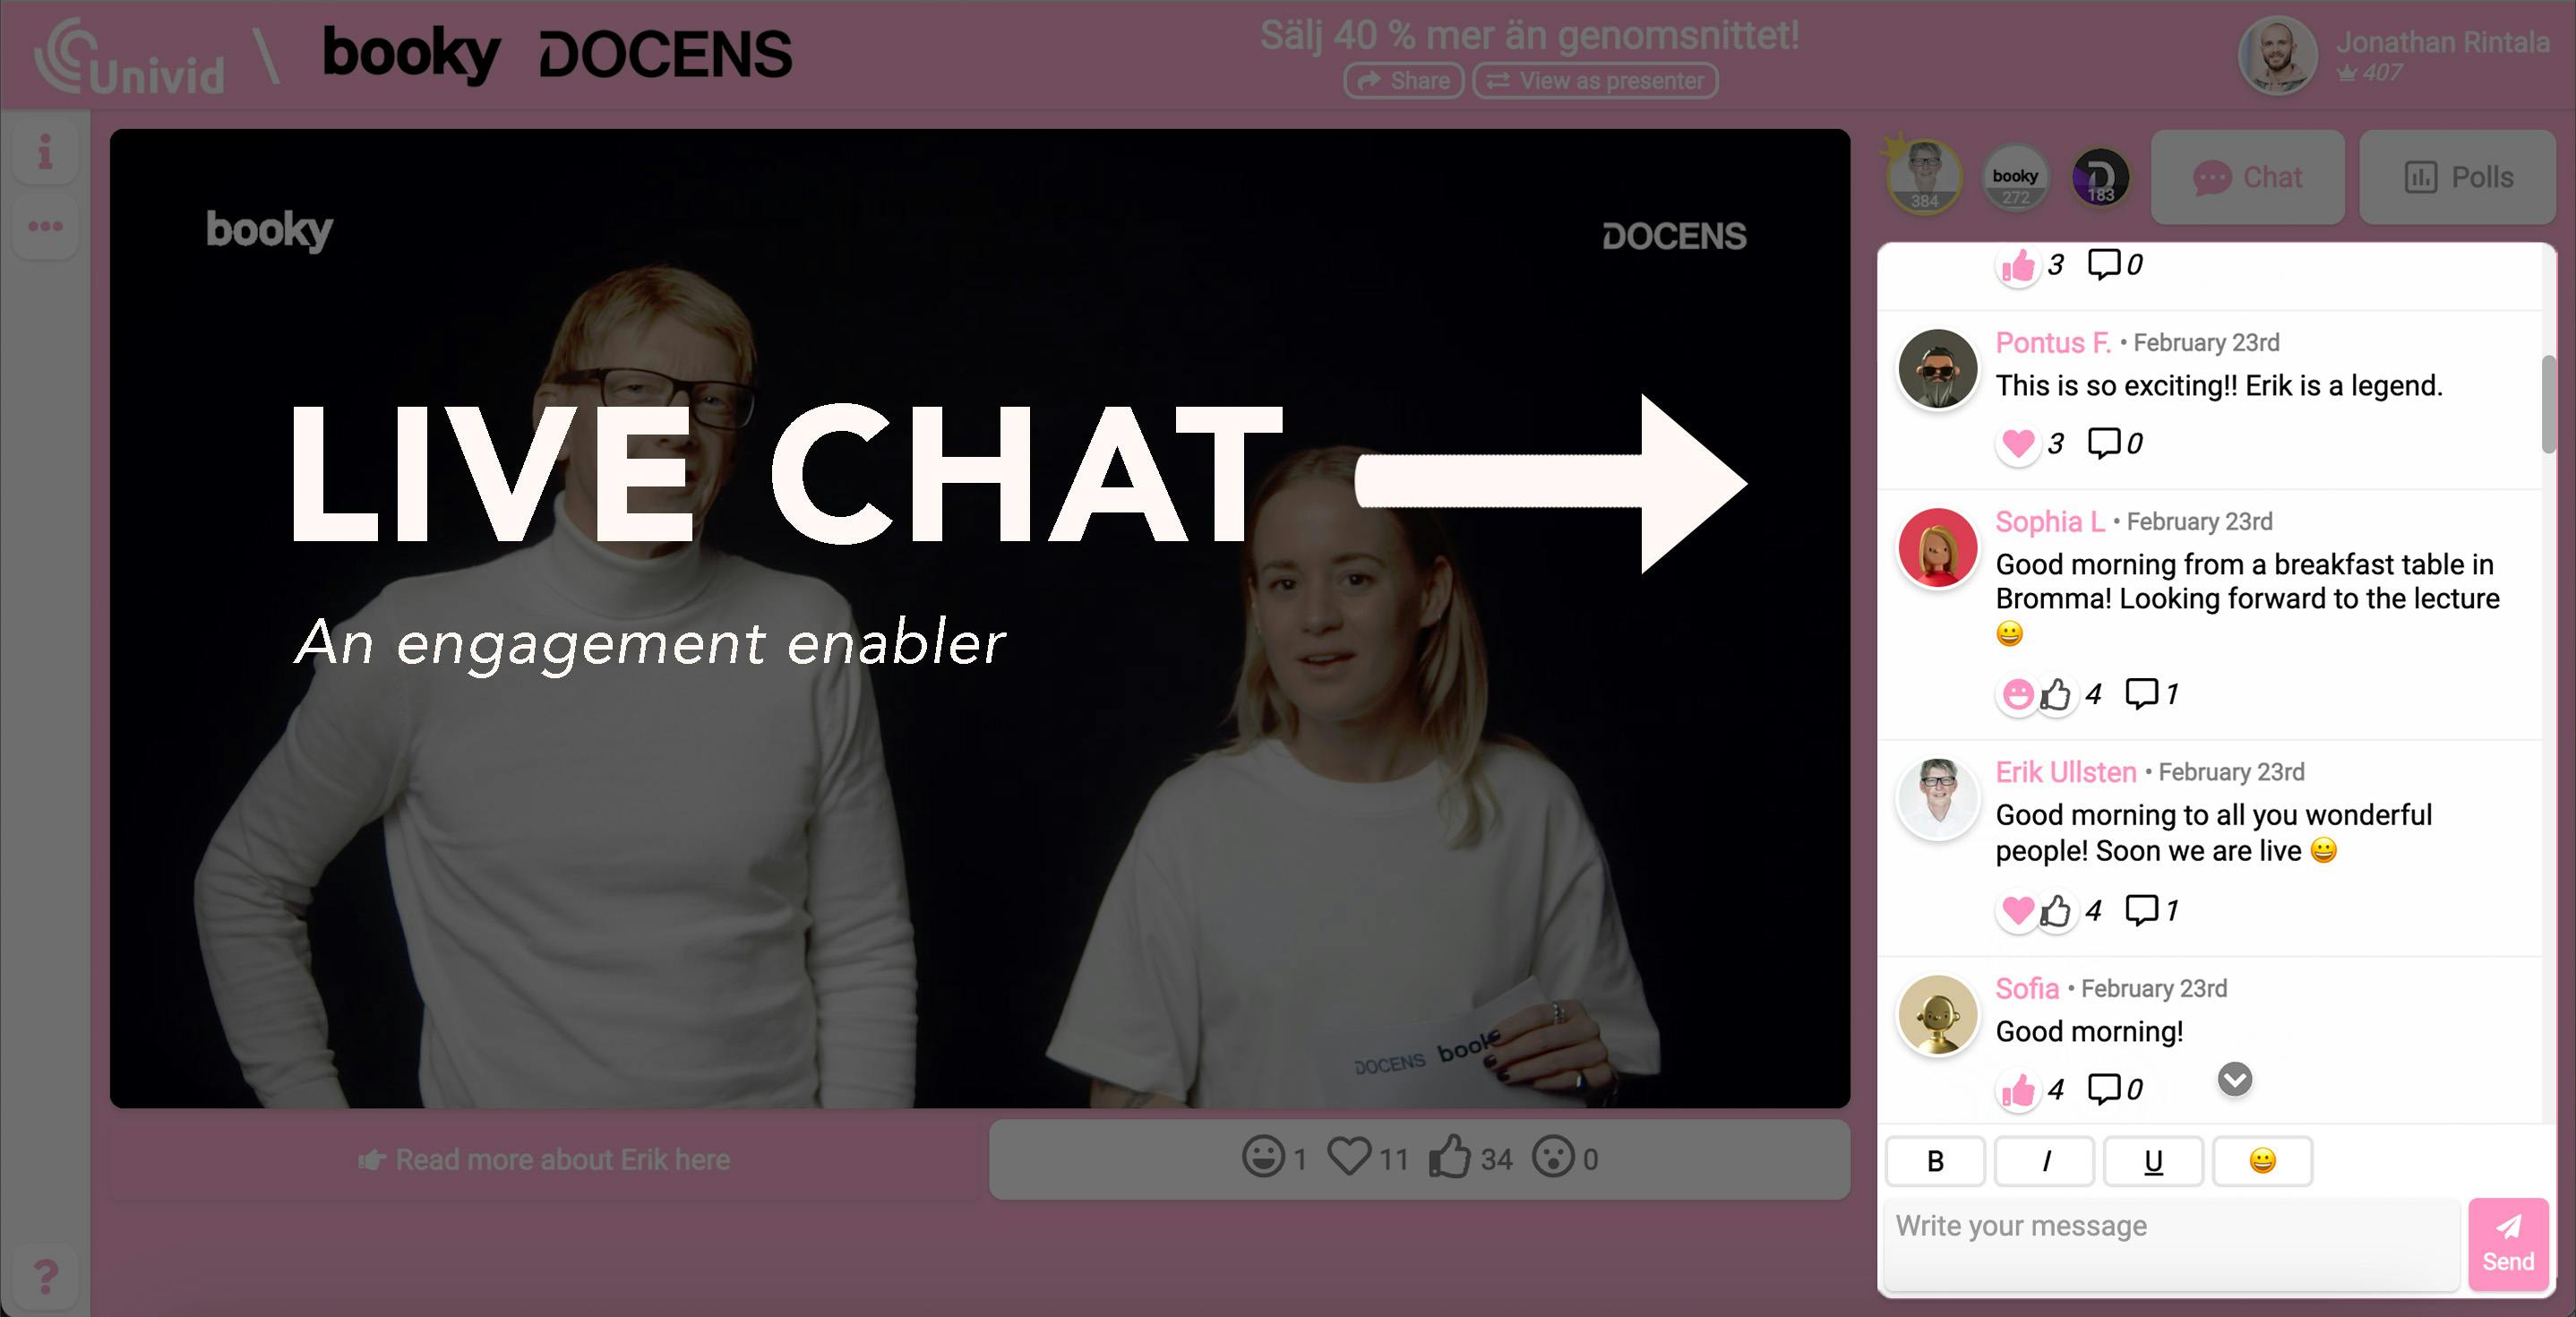 The live chat is a webinar engagement enabler